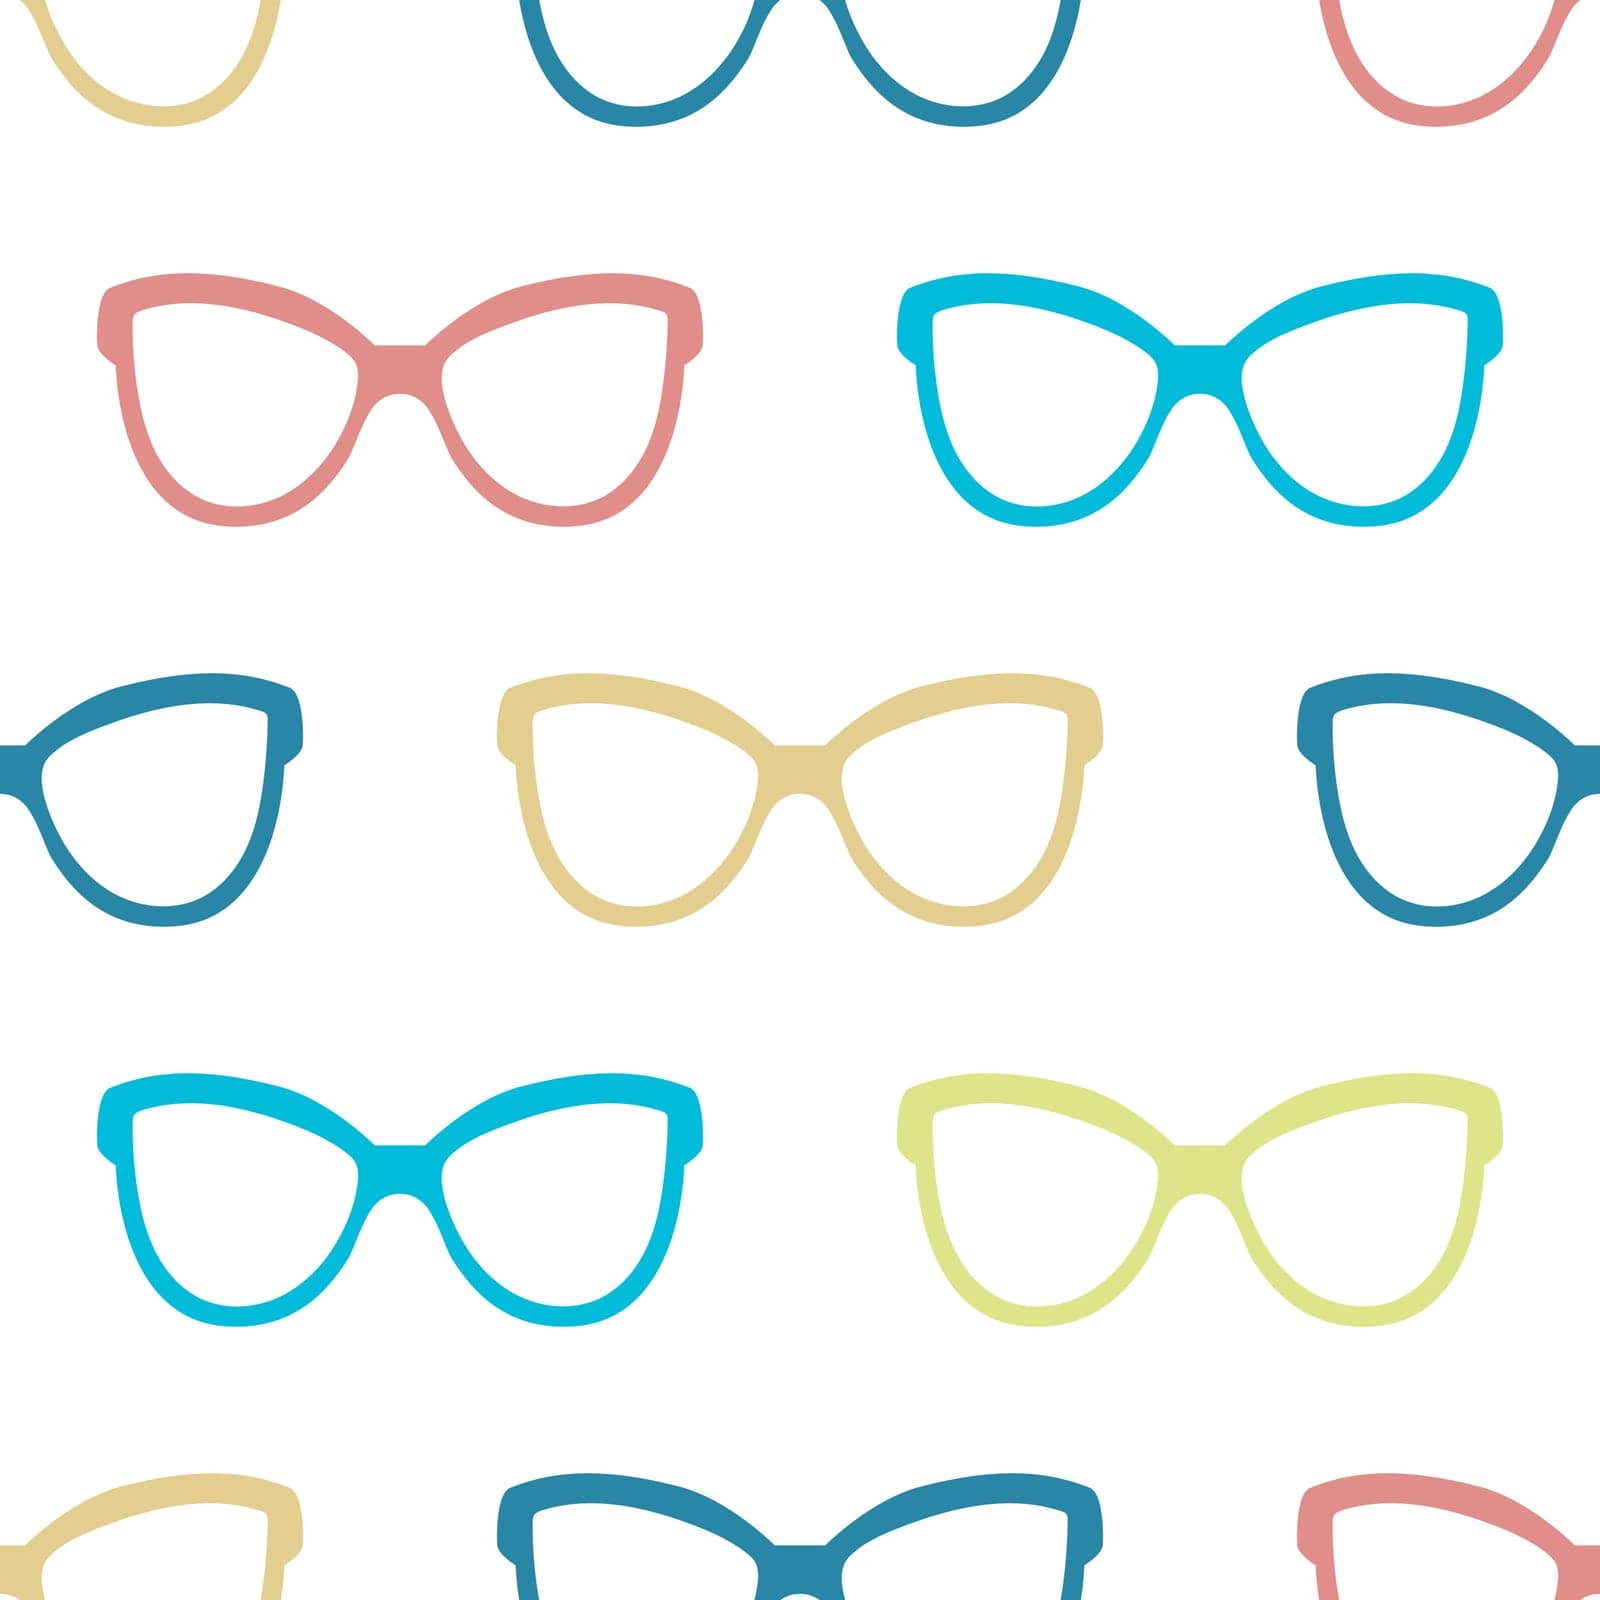 Child colored glasses seamless pattern by TassiaK